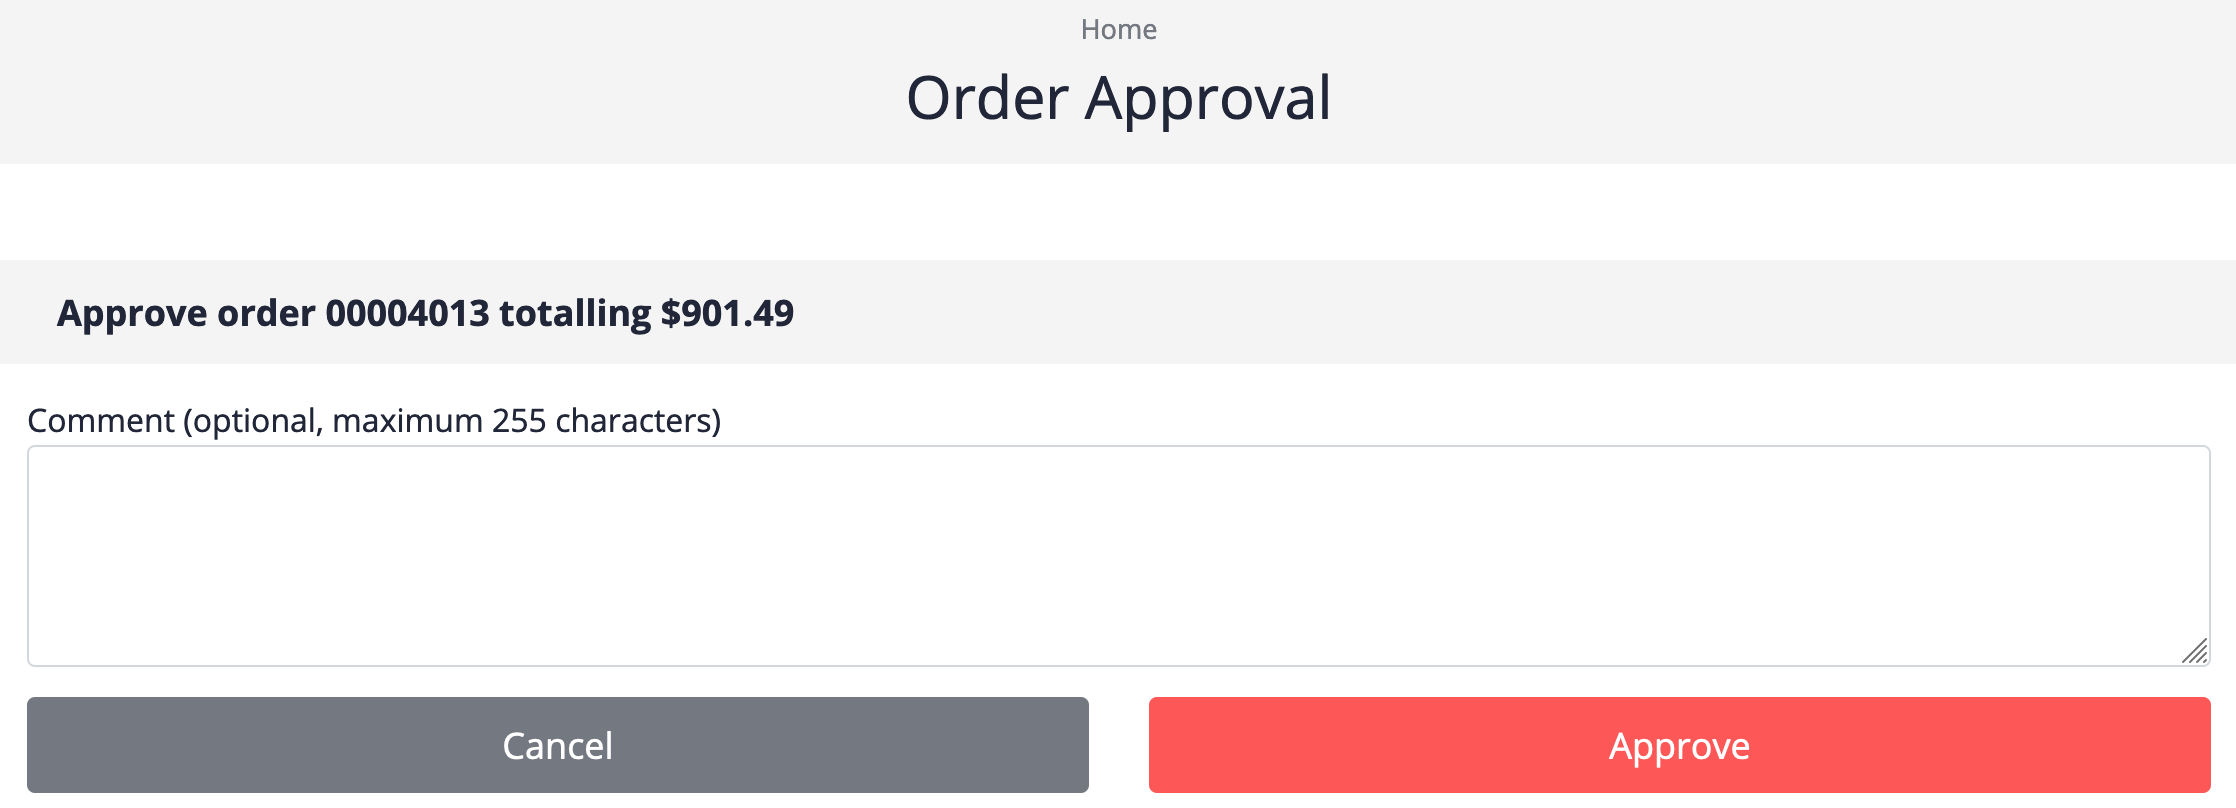 Order Approval Screen